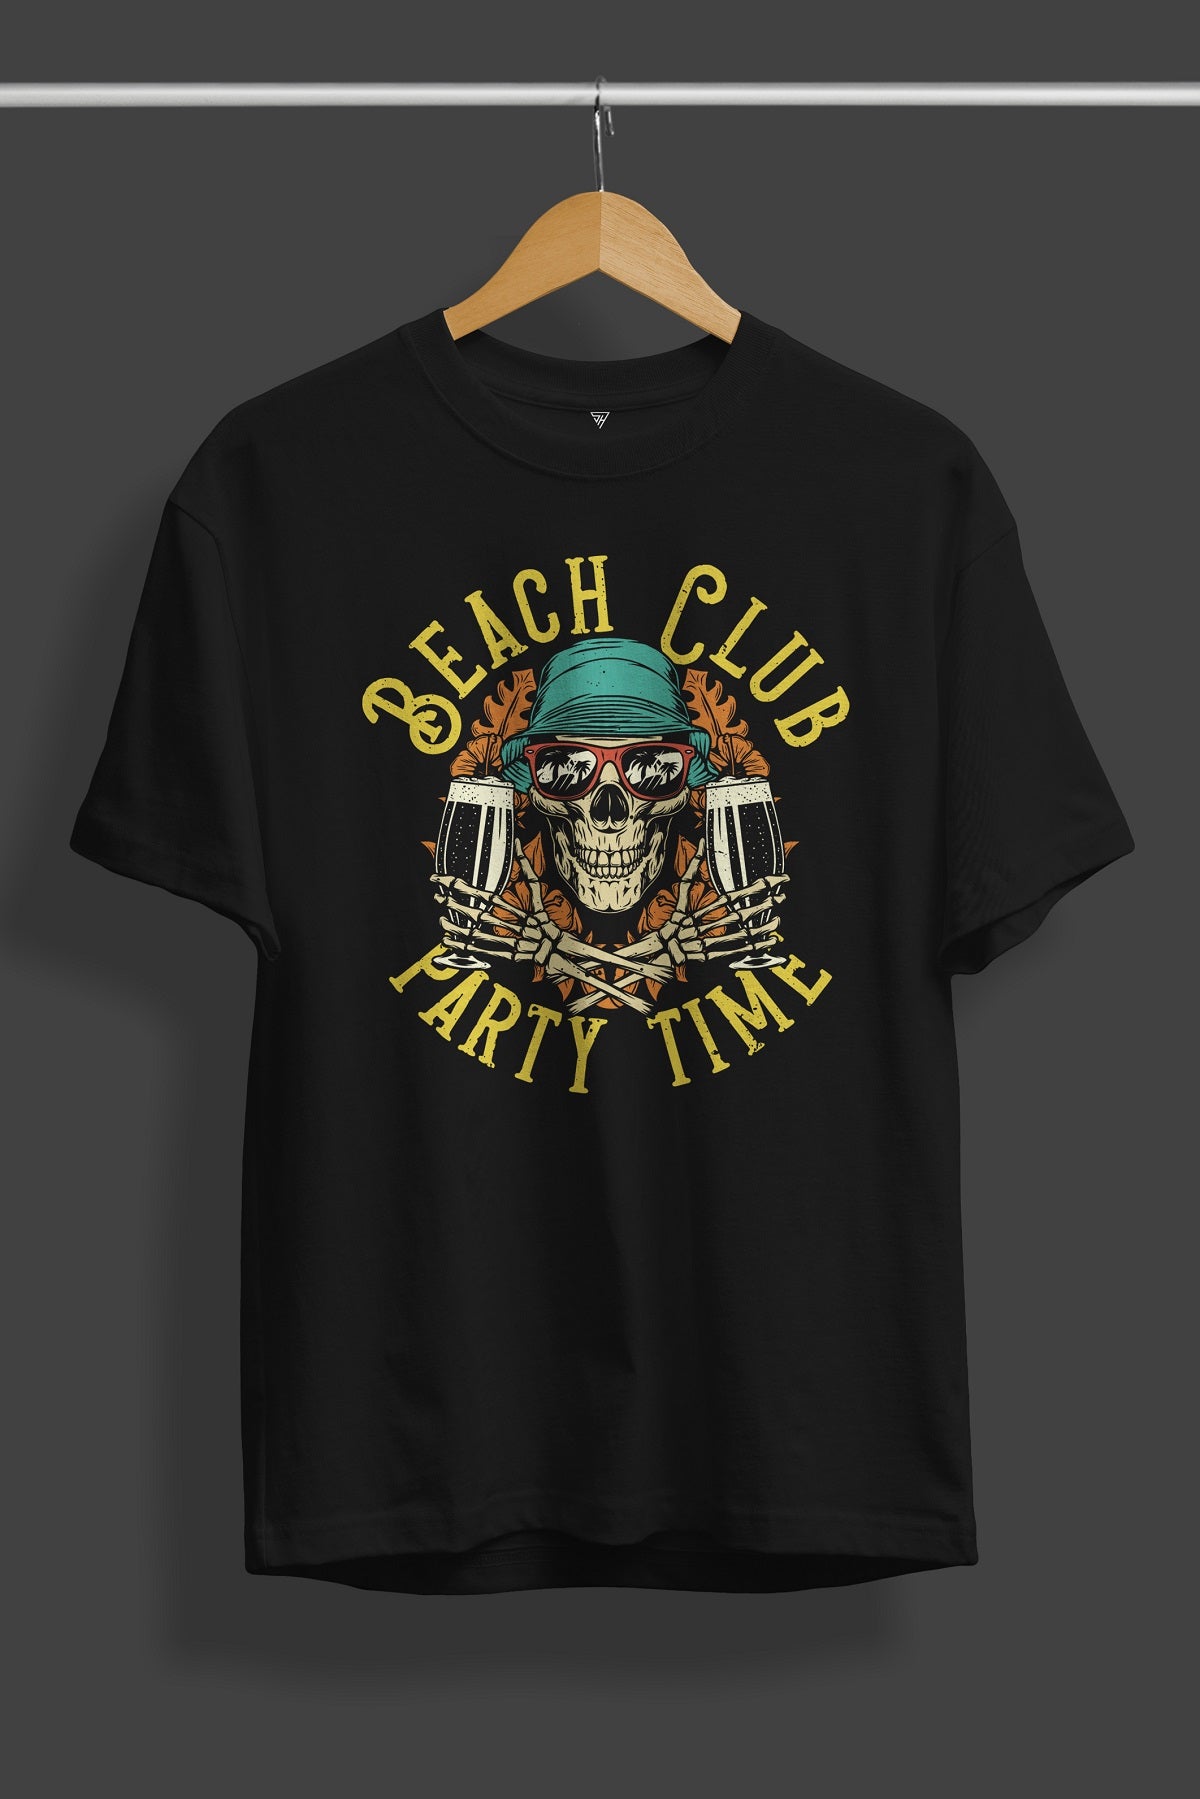 Beach Club Party Time Graphic T-Shirt - SQUIREHOOD